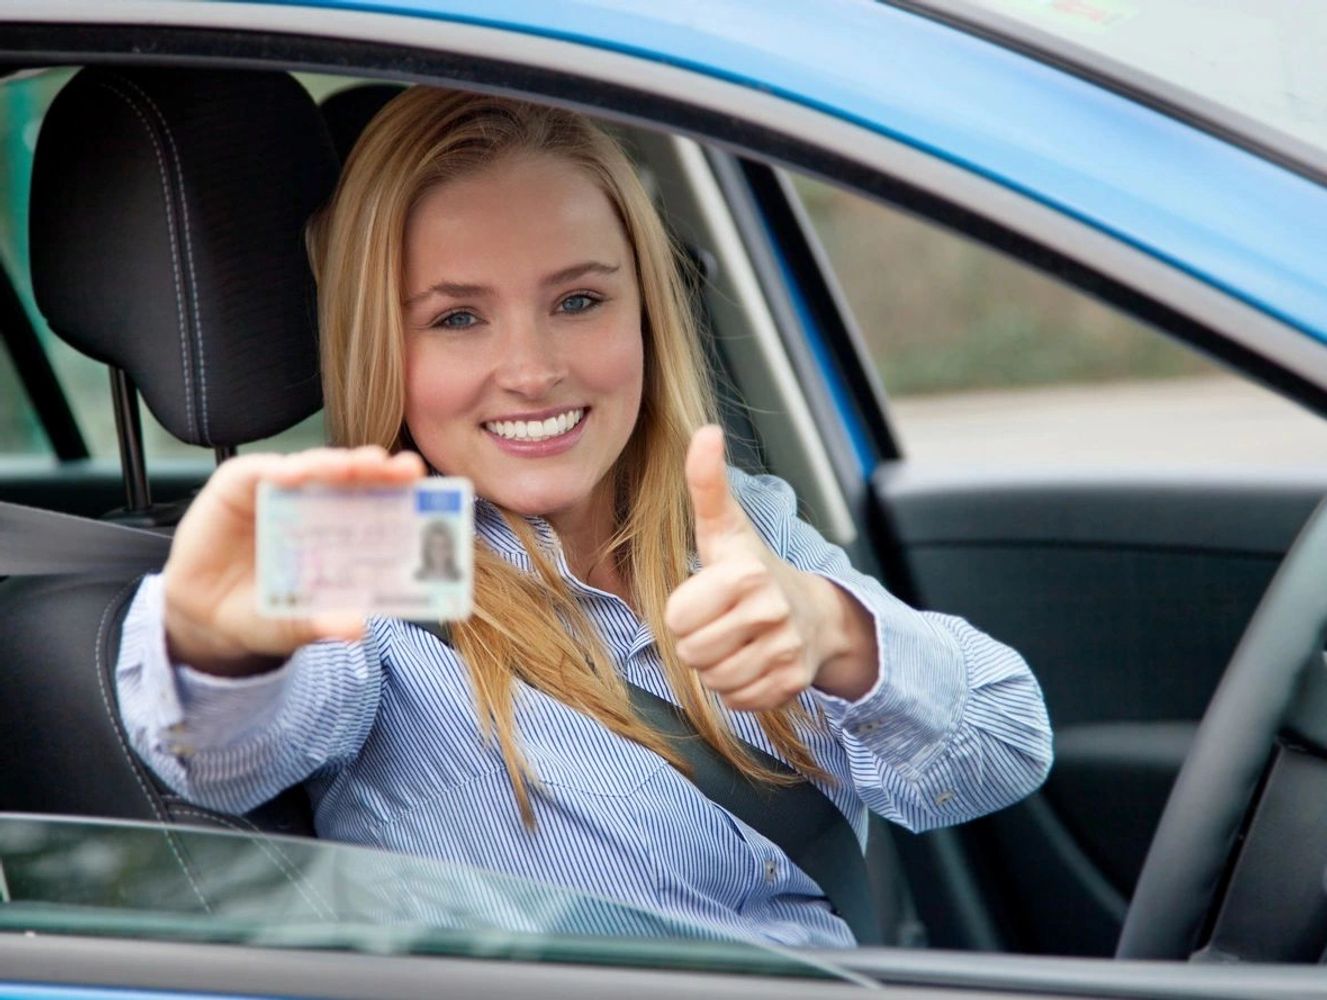 Driver showing driving licence. Passed driving test.